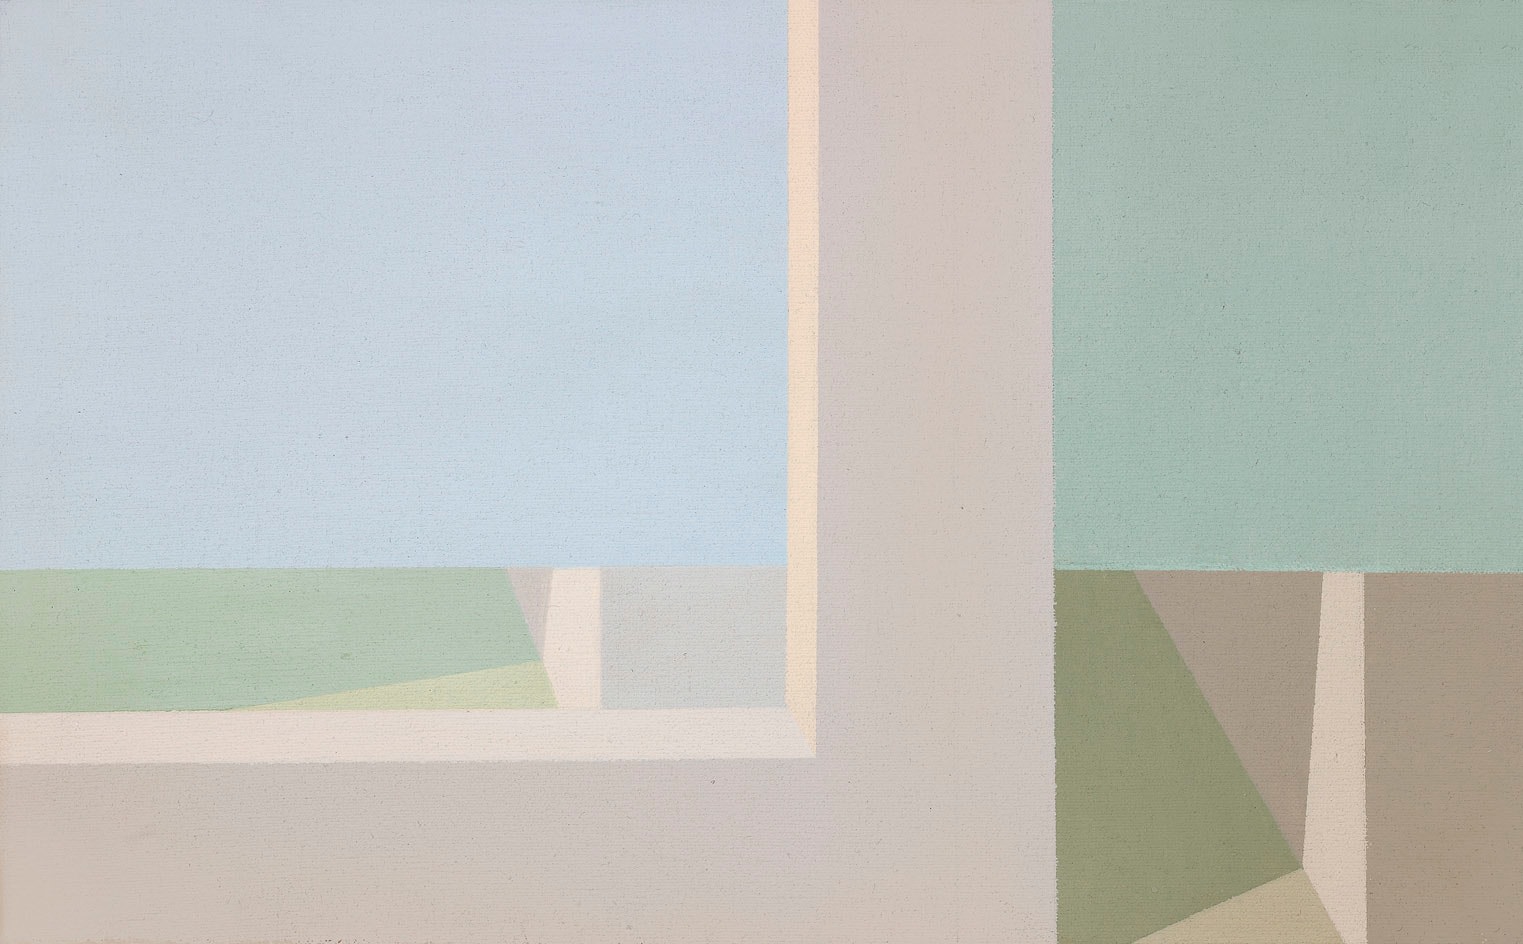 Double View, 1973

Acrylic on canvas

10 x 16 inches&amp;nbsp;&amp;nbsp;&amp;nbsp;&amp;nbsp;